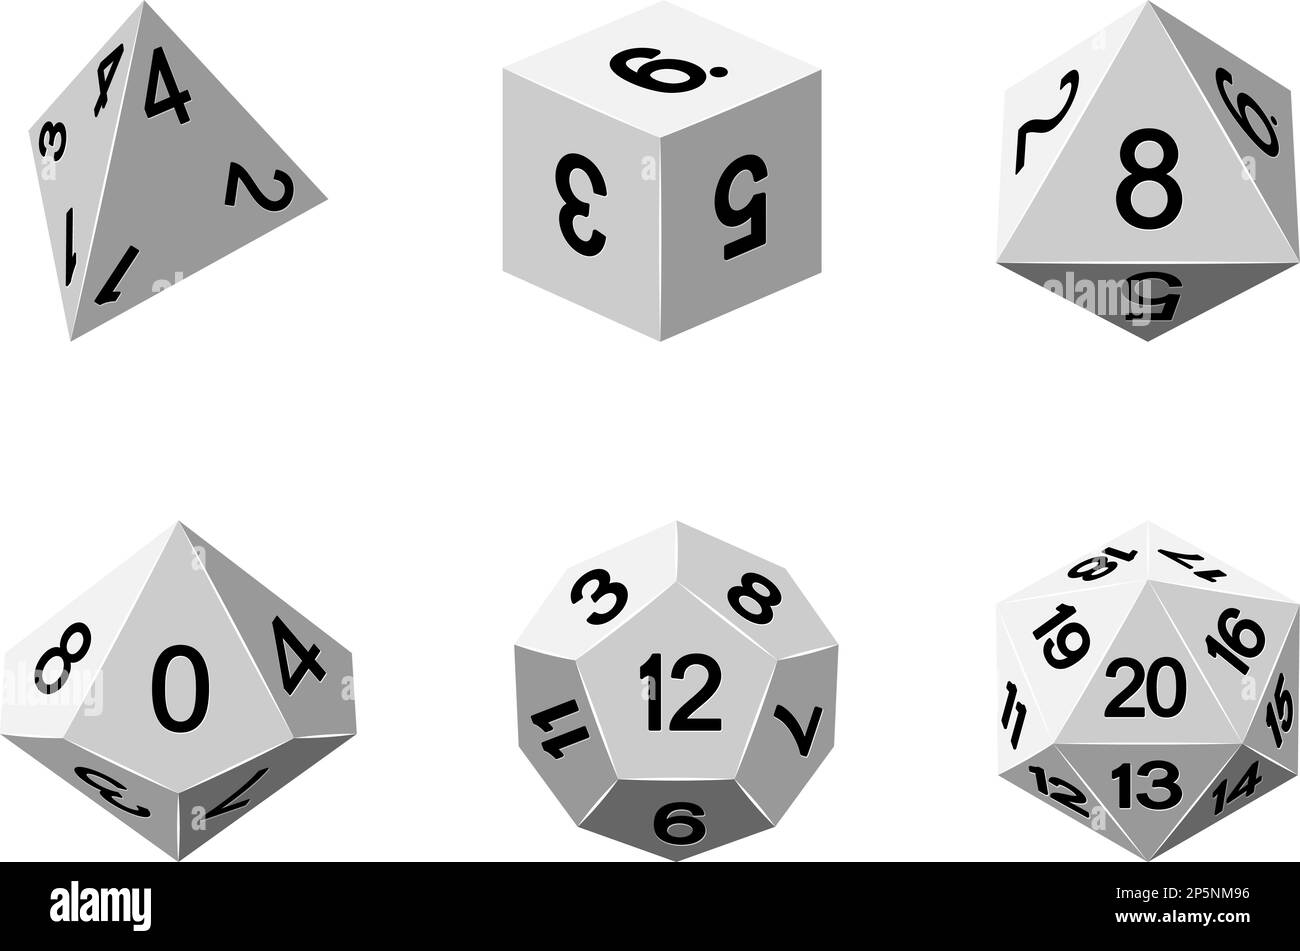 Game Dice Illustration Roleplaying Board Game Set Stock Vector